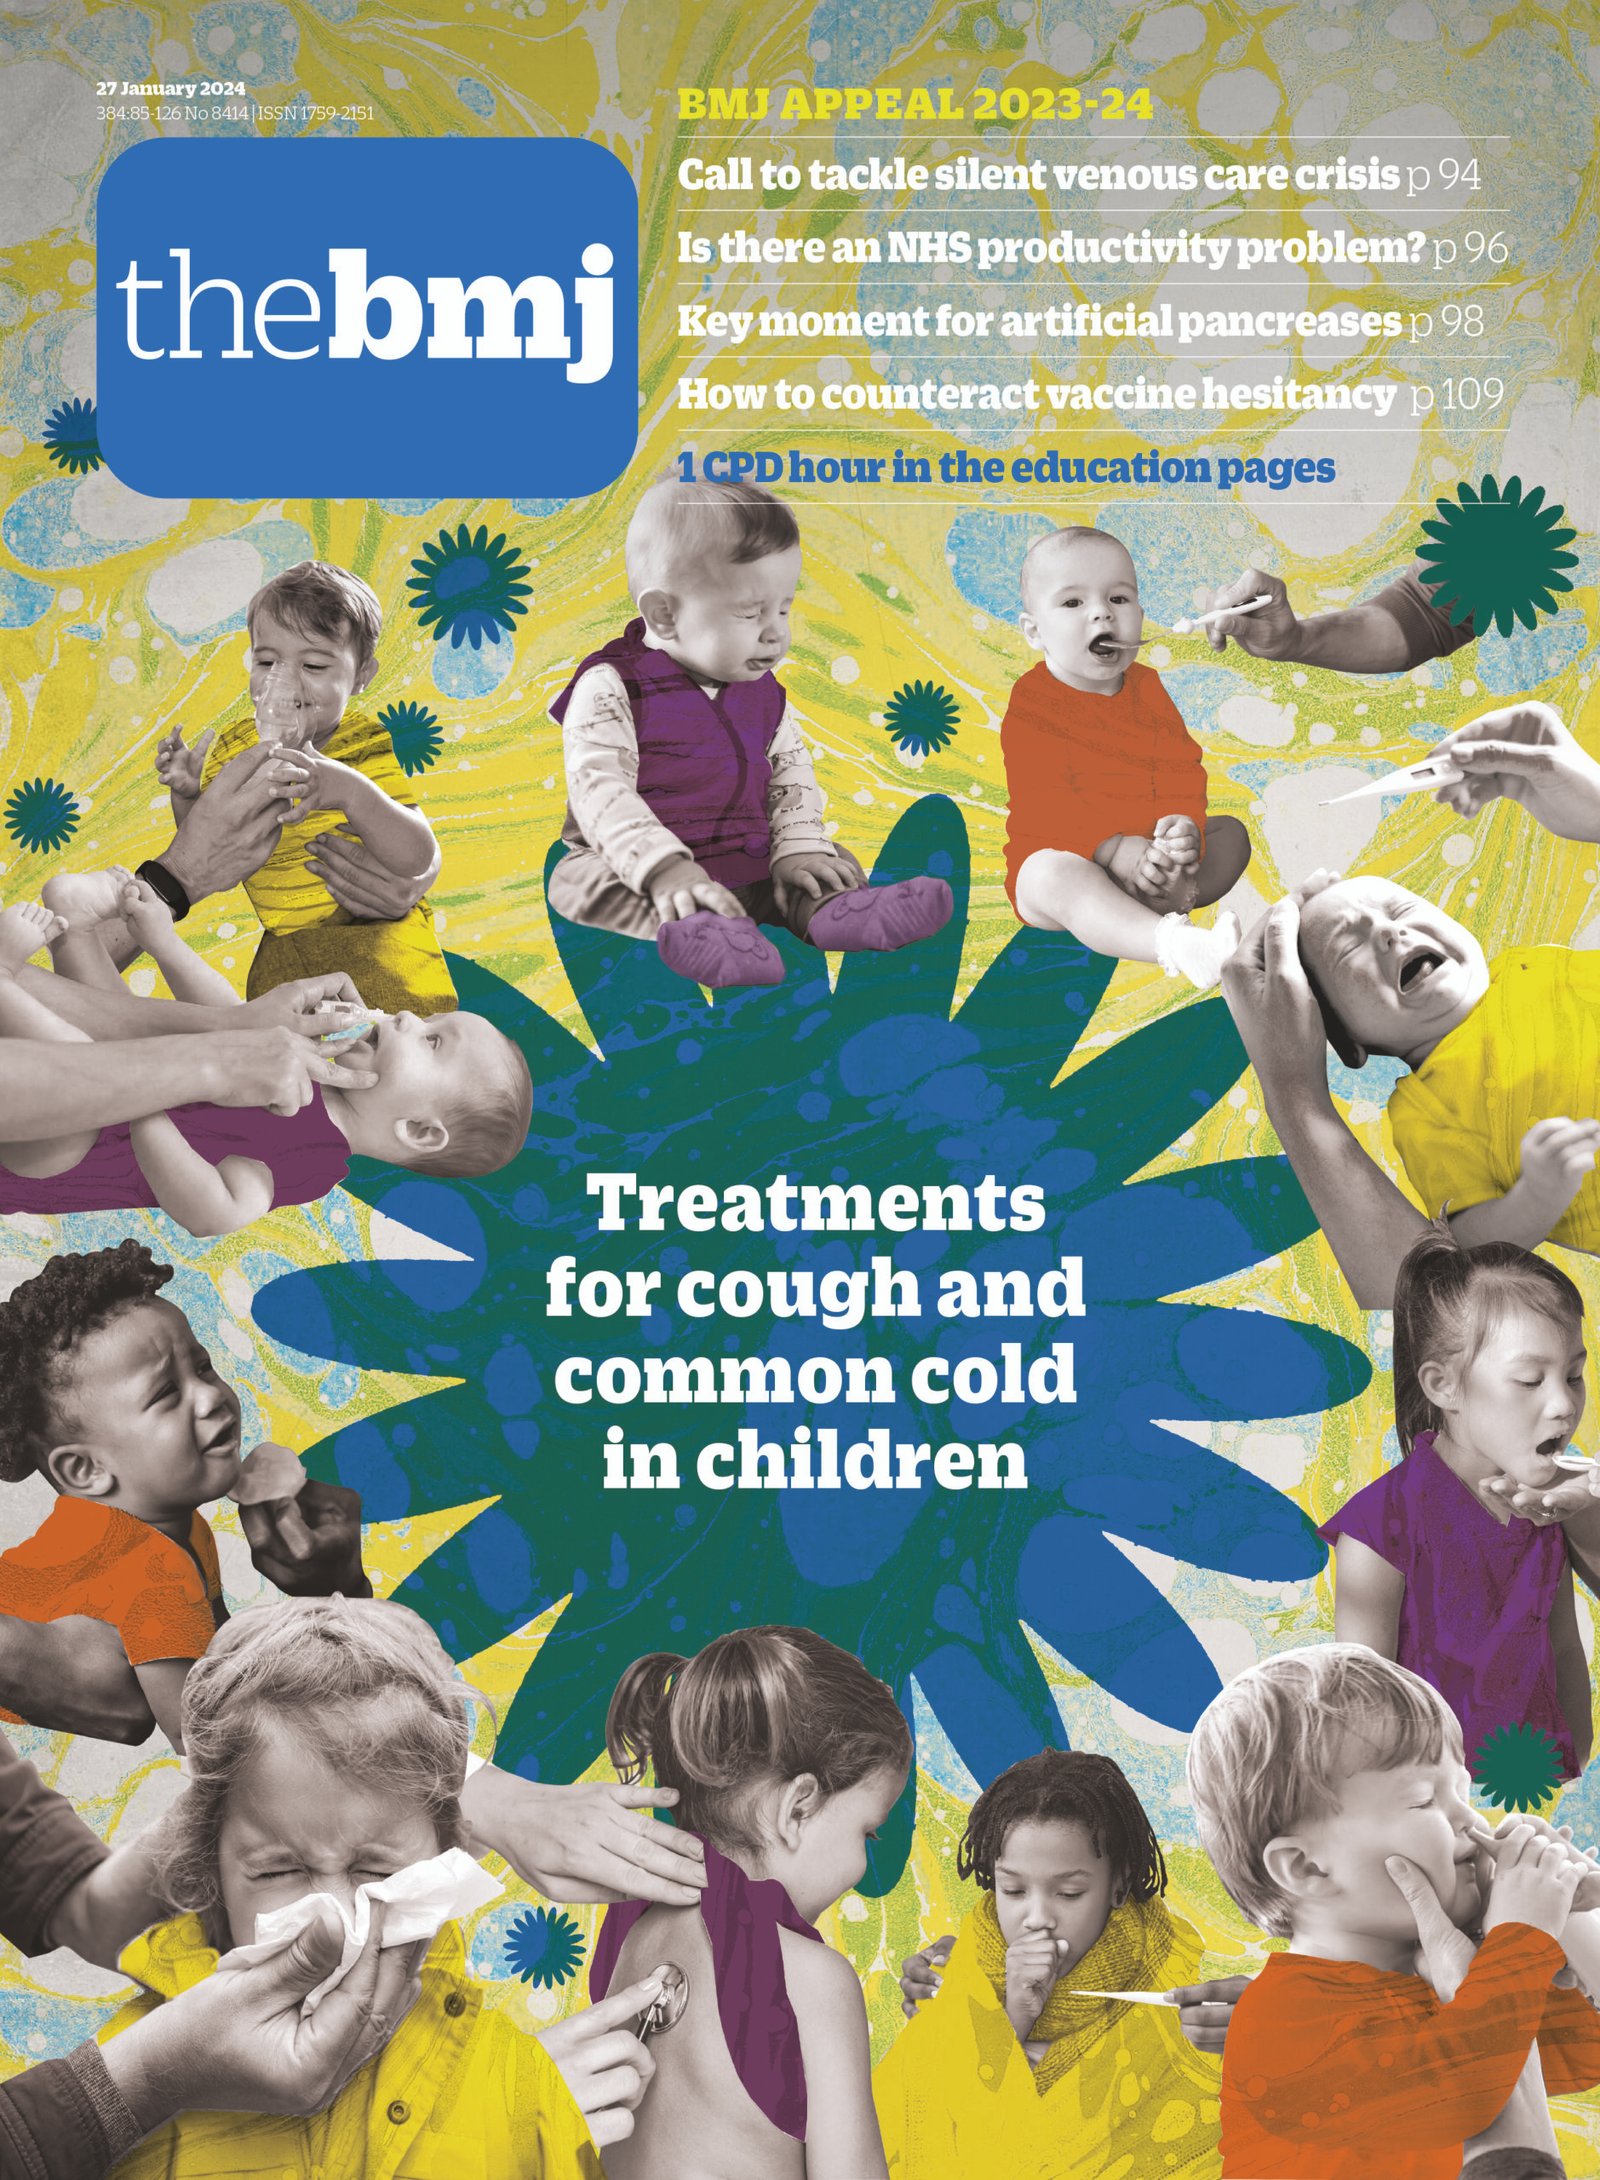 Treatments for cough and common cold in children